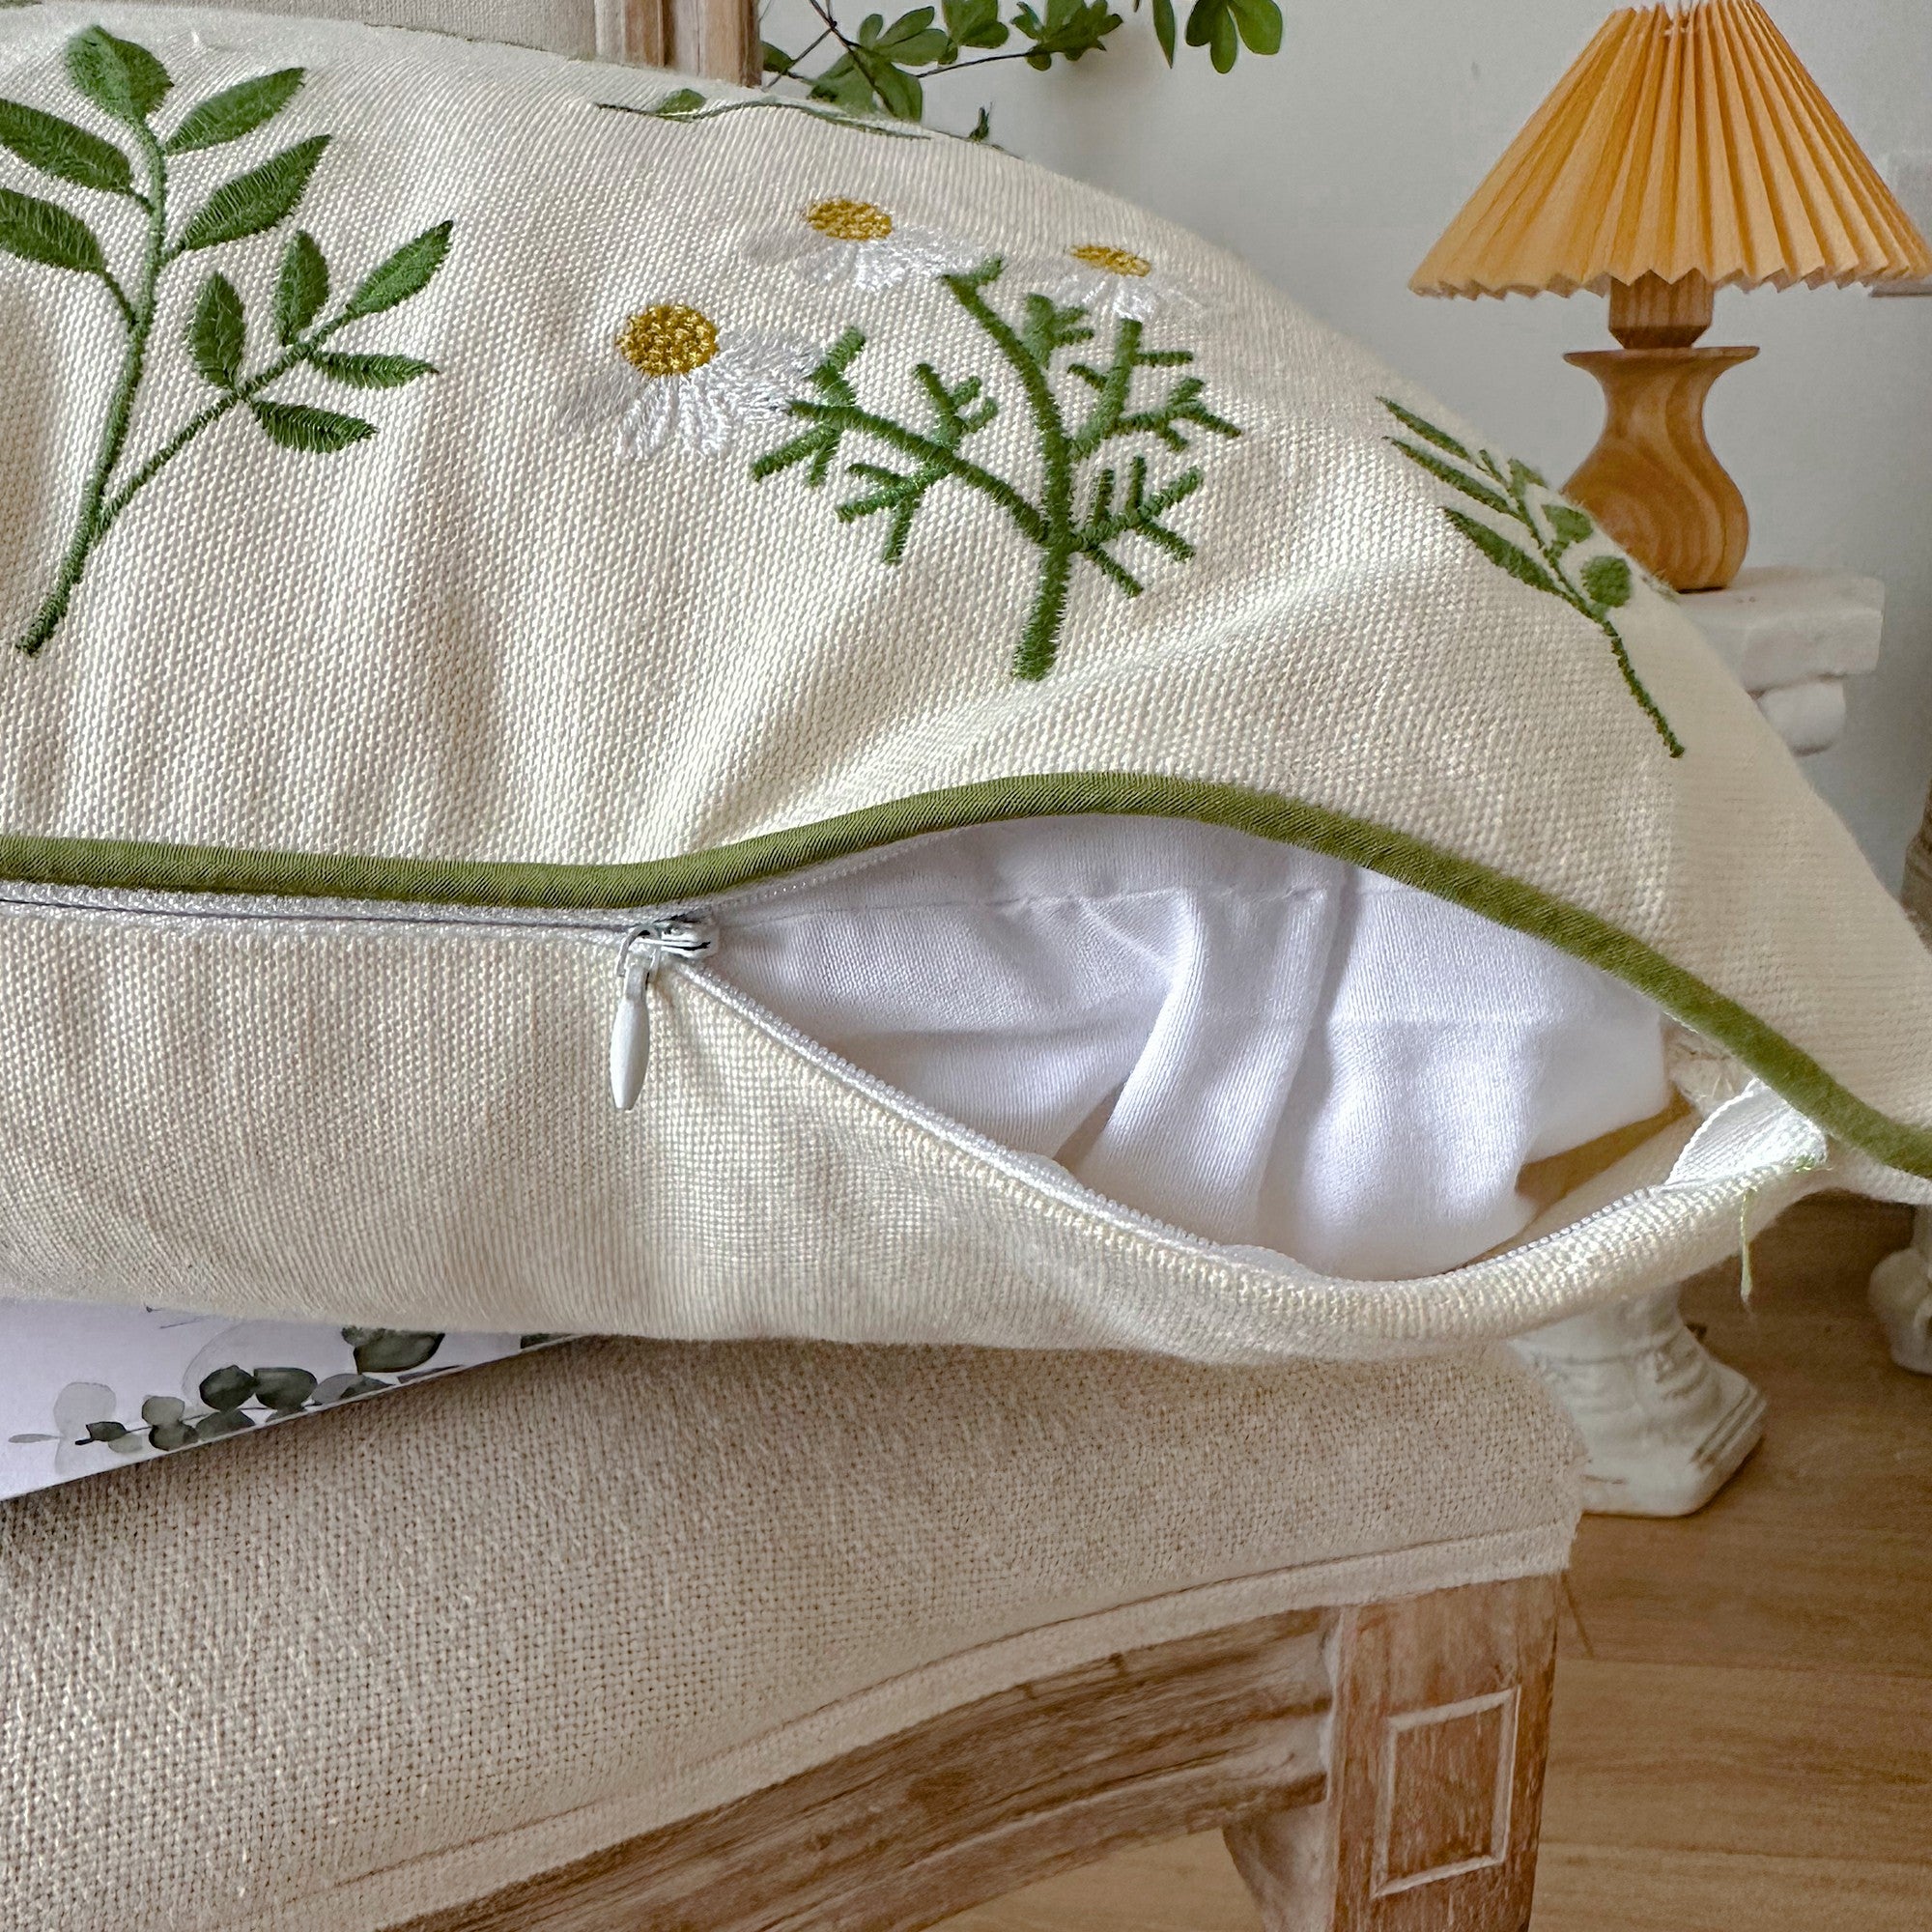 Embroidery Spring Plants Throw Pillow Covers